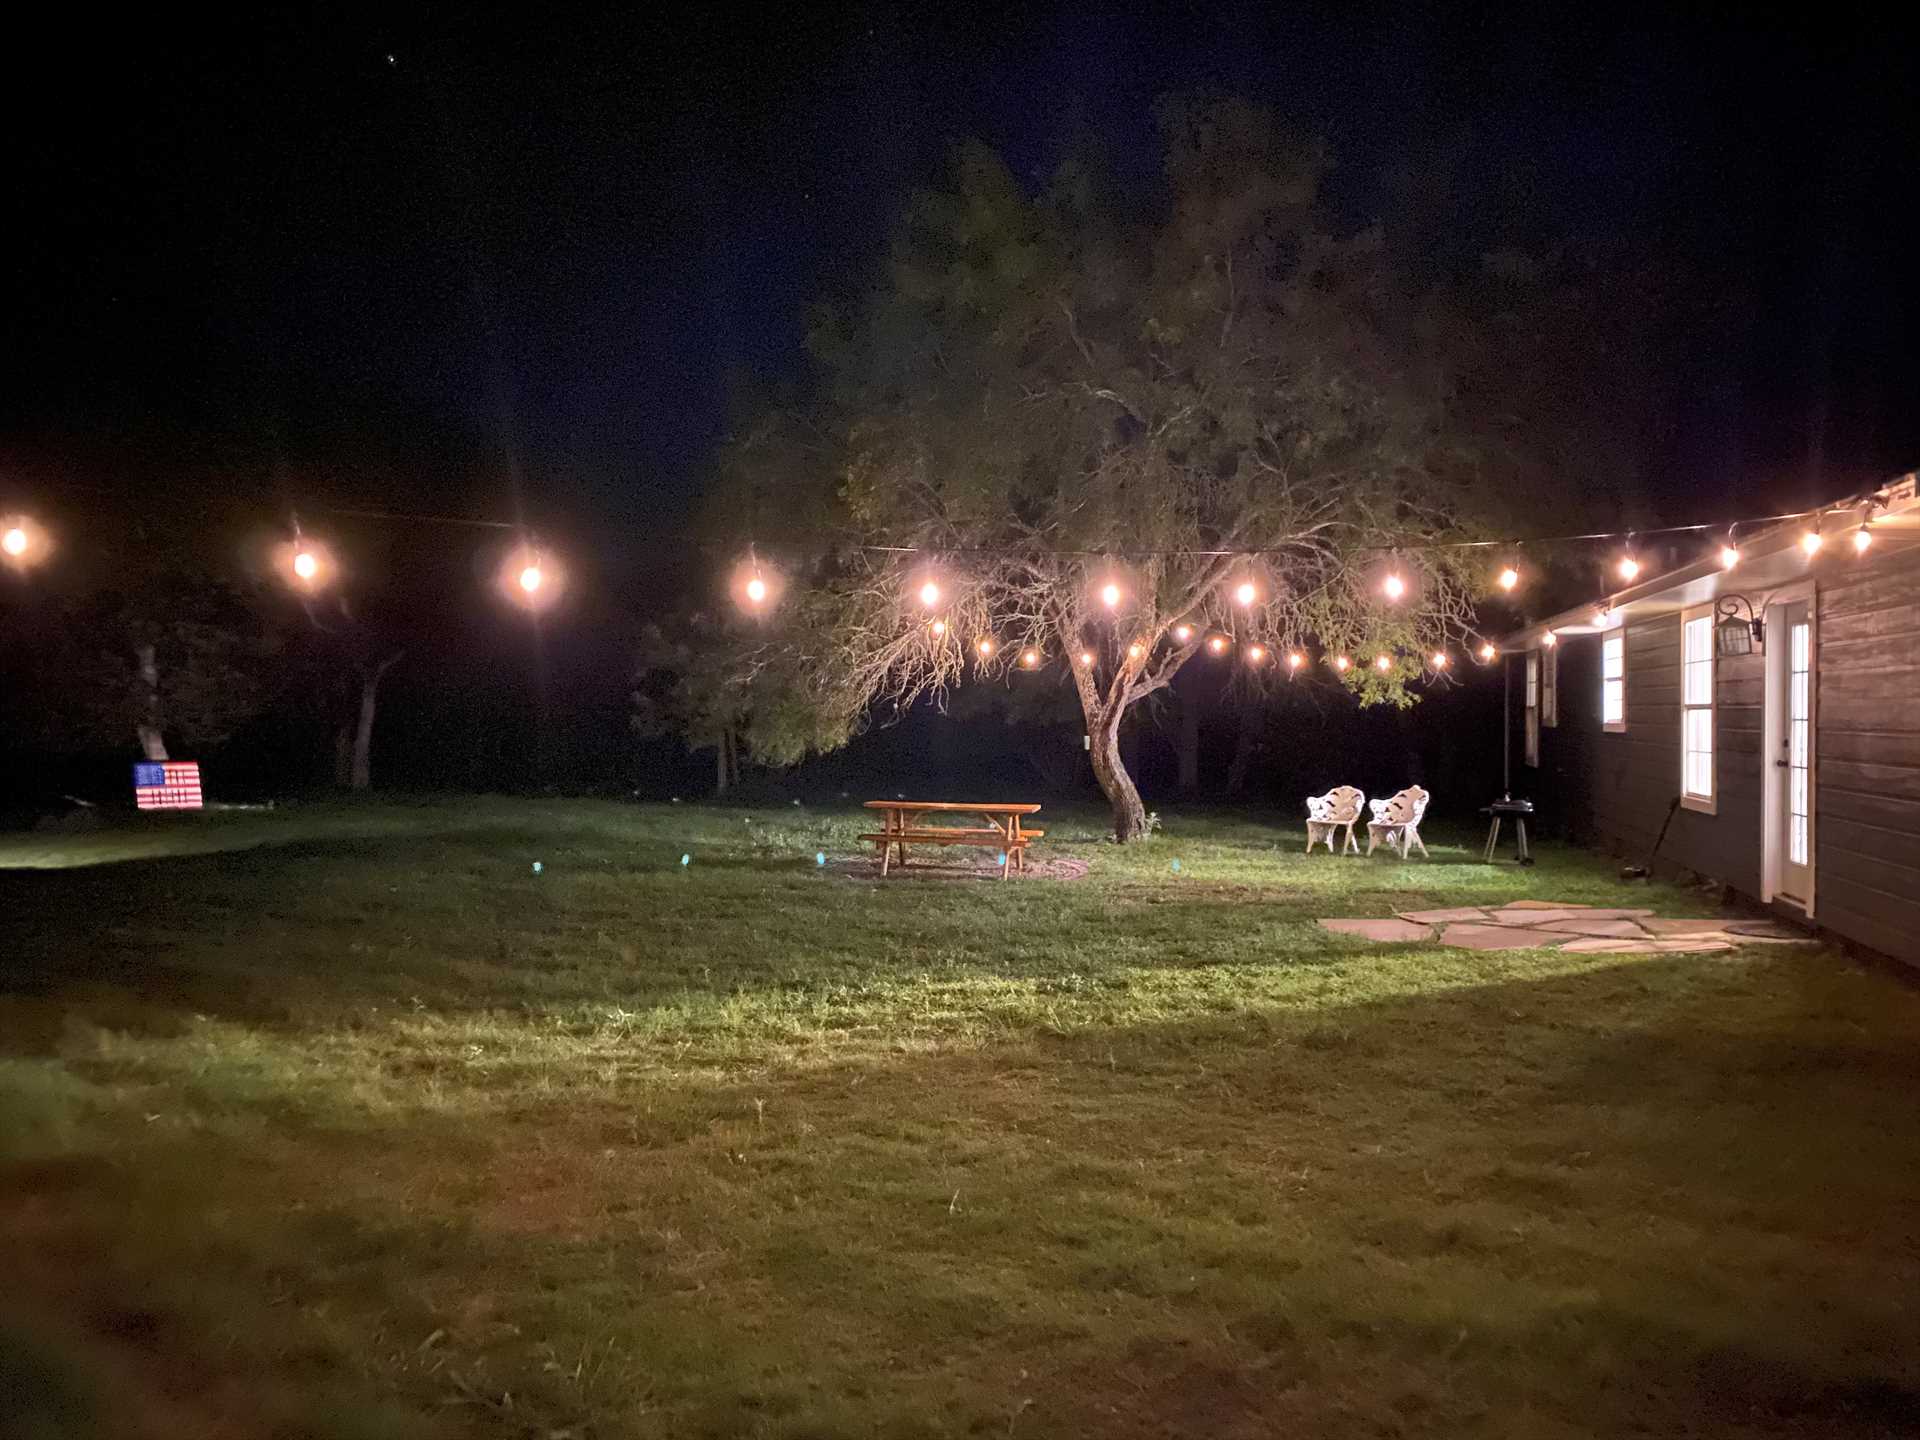                                                 Just because night has fallen doesn't mean the outdoor fun has to end! Enjoy cool country evenings under the magical glow of outdoor lighting, or gather around the crackling glow of the fire pit!